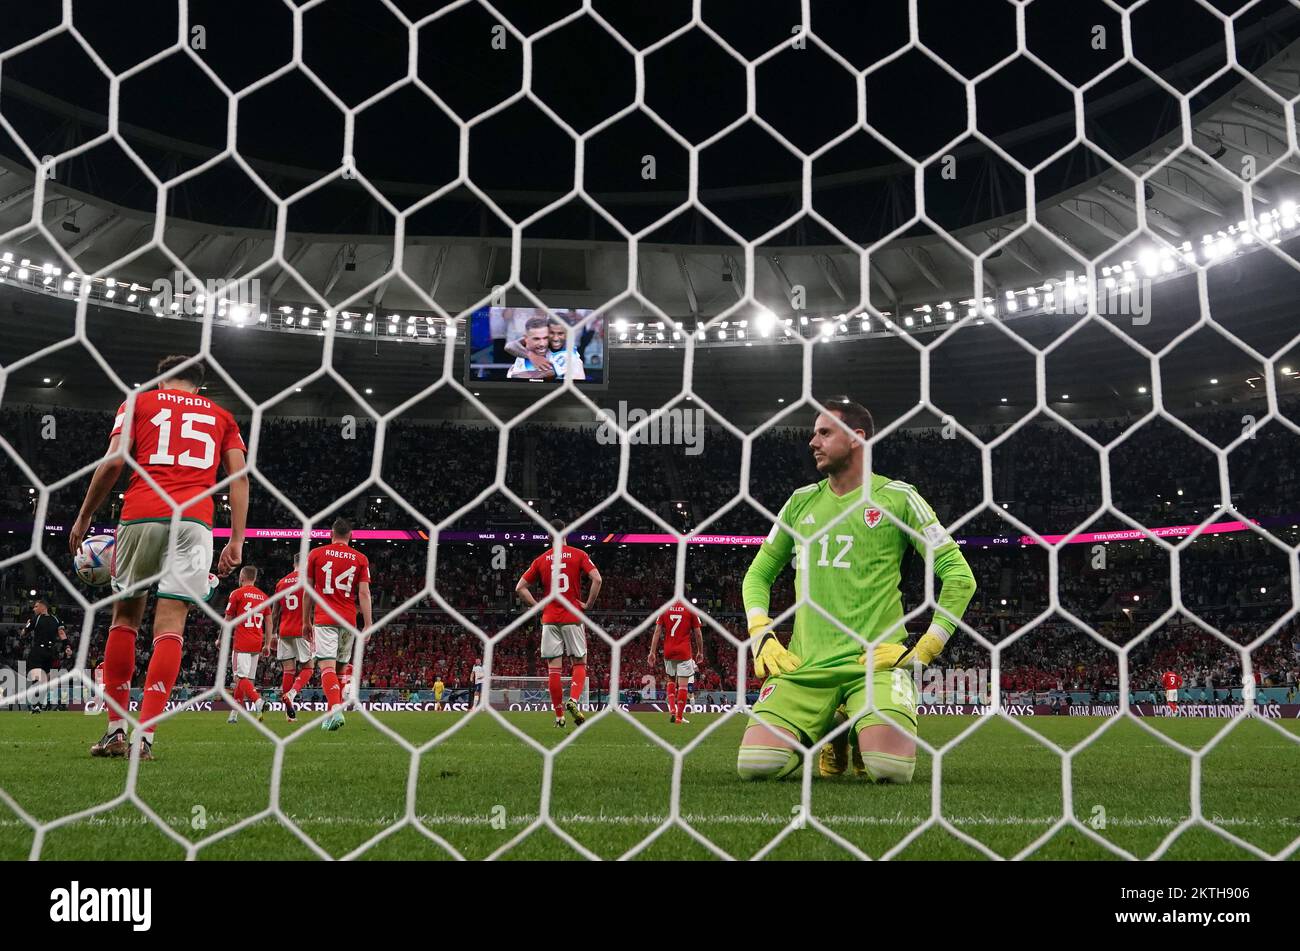 Wales goalkeeper Danny Ward sits dejected after failing to stop England's Marcus Rashford scoring the third goal during the FIFA World Cup Group B match at the Ahmad Bin Ali Stadium, Al Rayyan, Qatar. Picture date: Tuesday November 29, 2022. Stock Photo